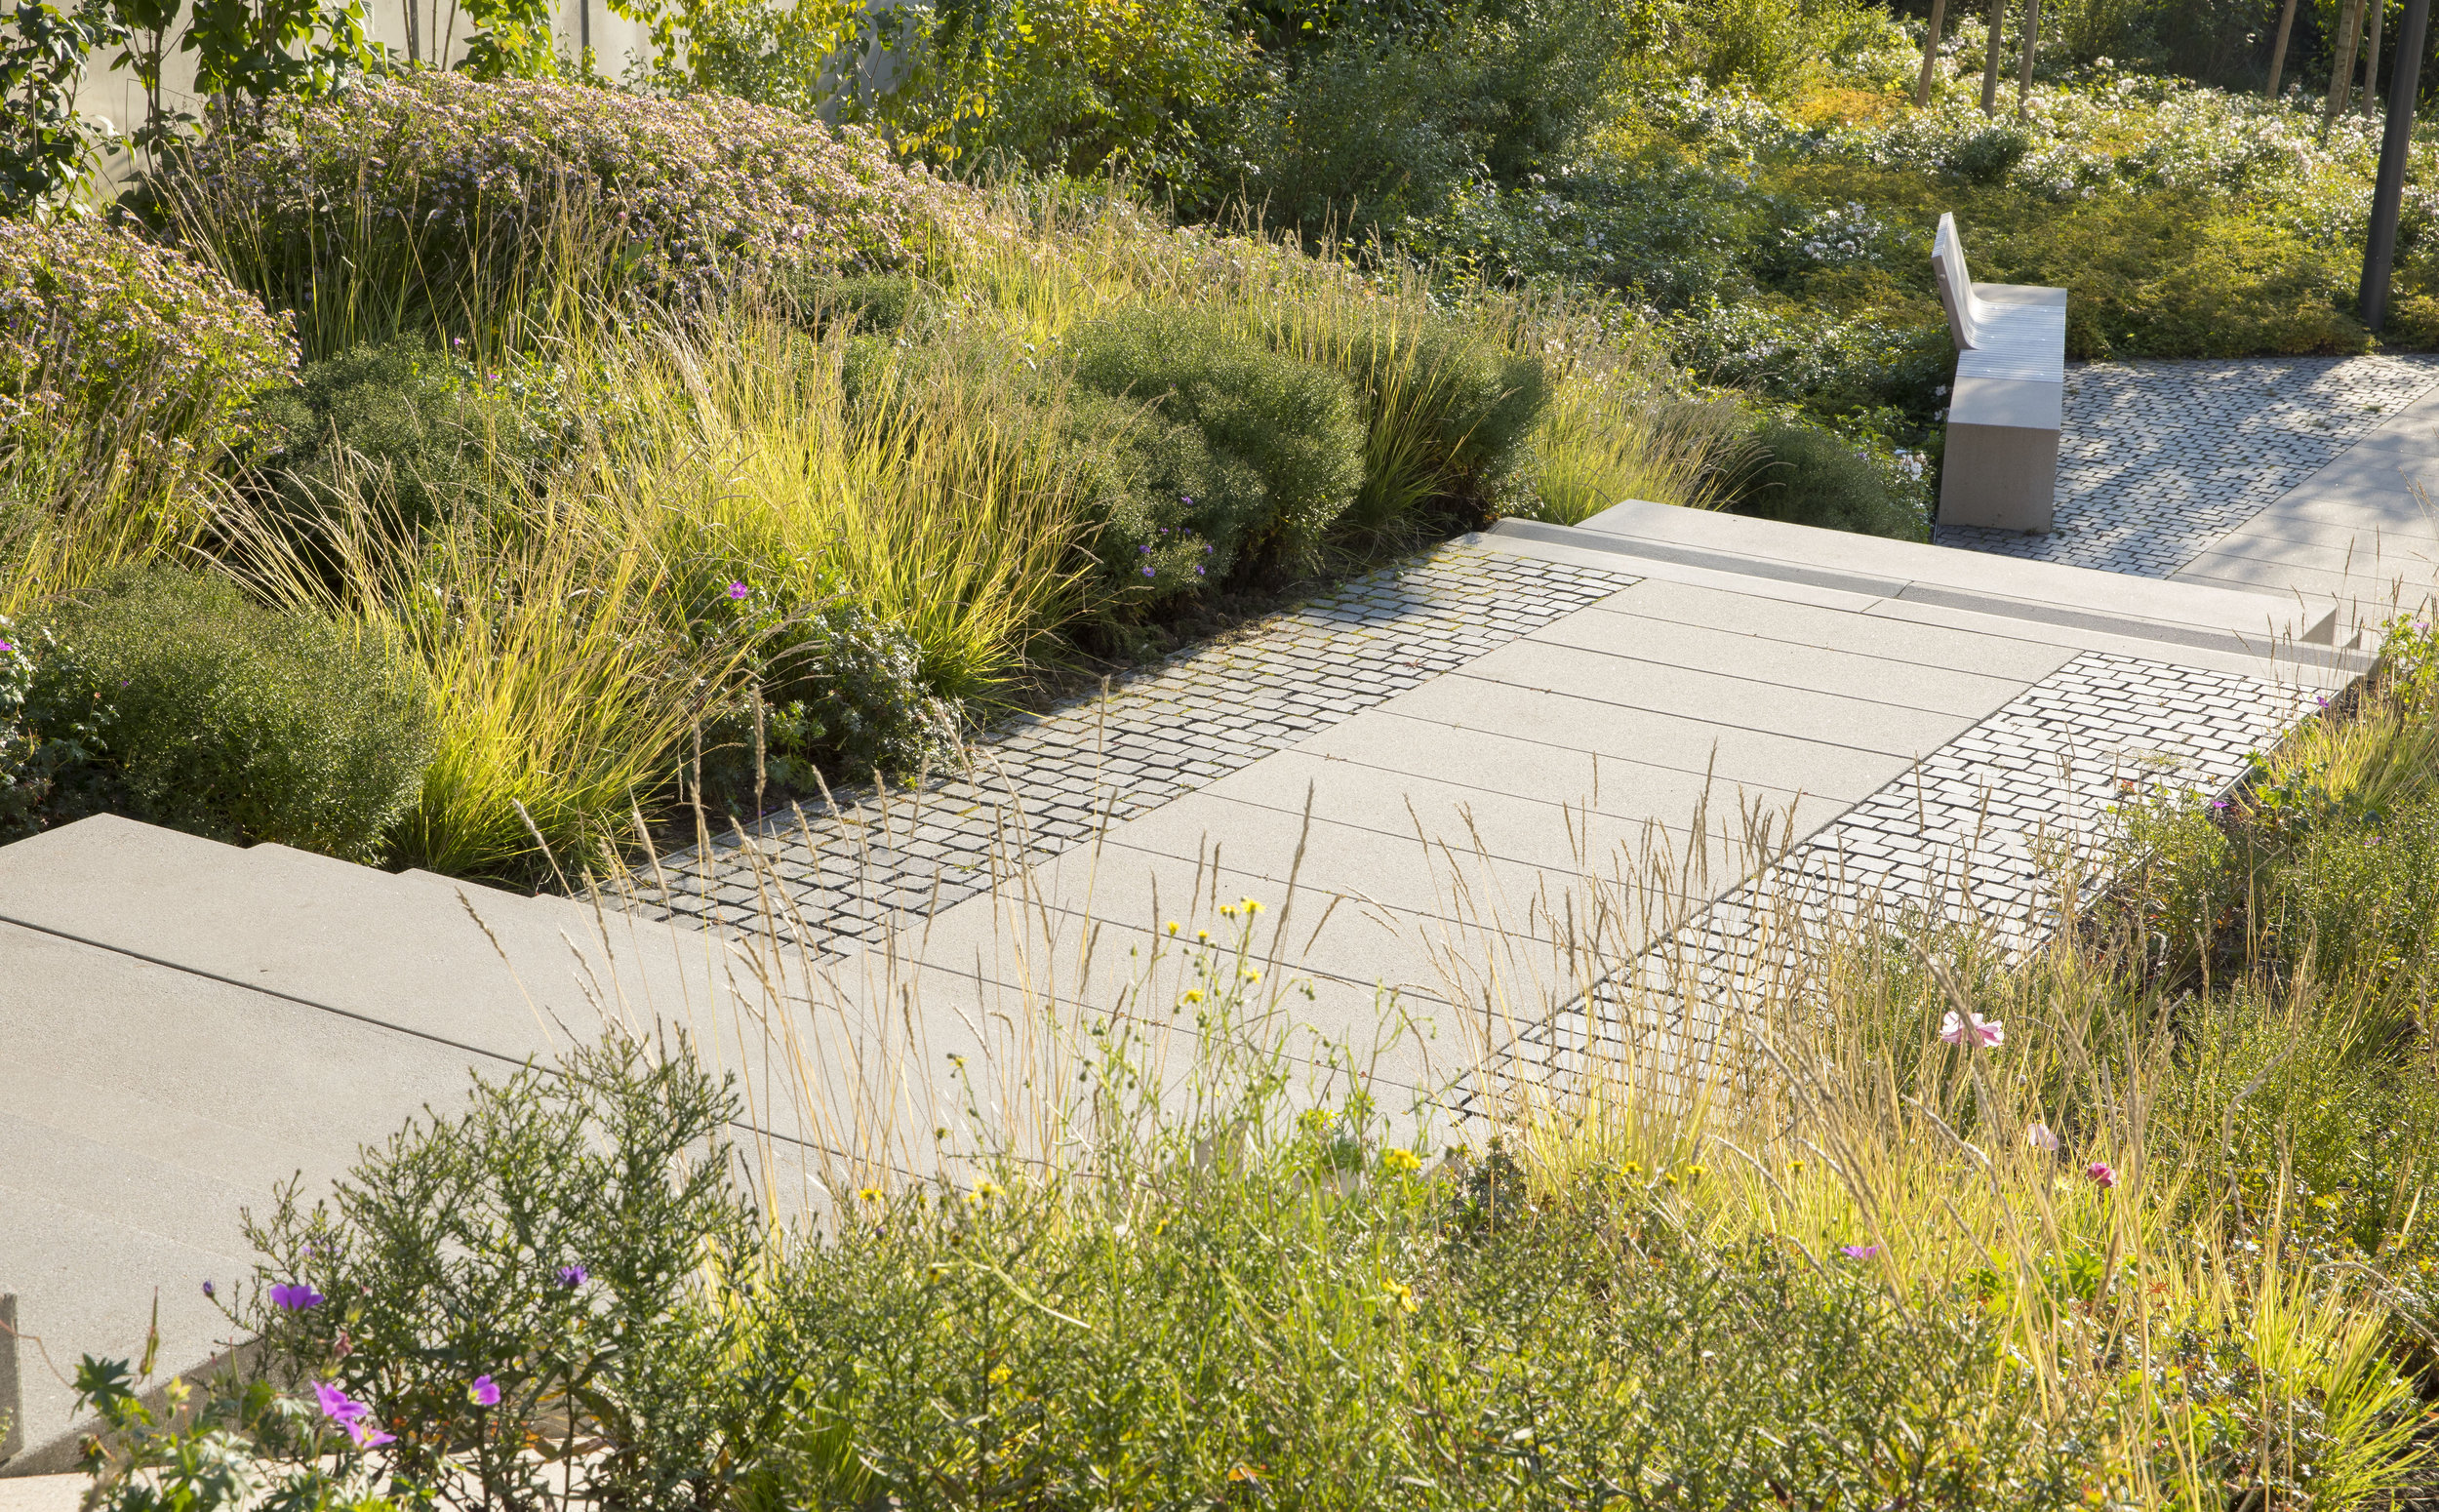  The JdL development is connected to the existing urban framework through a network of public paths. An attractive planting scheme allows for fun walks in the city throughout the seasons. 